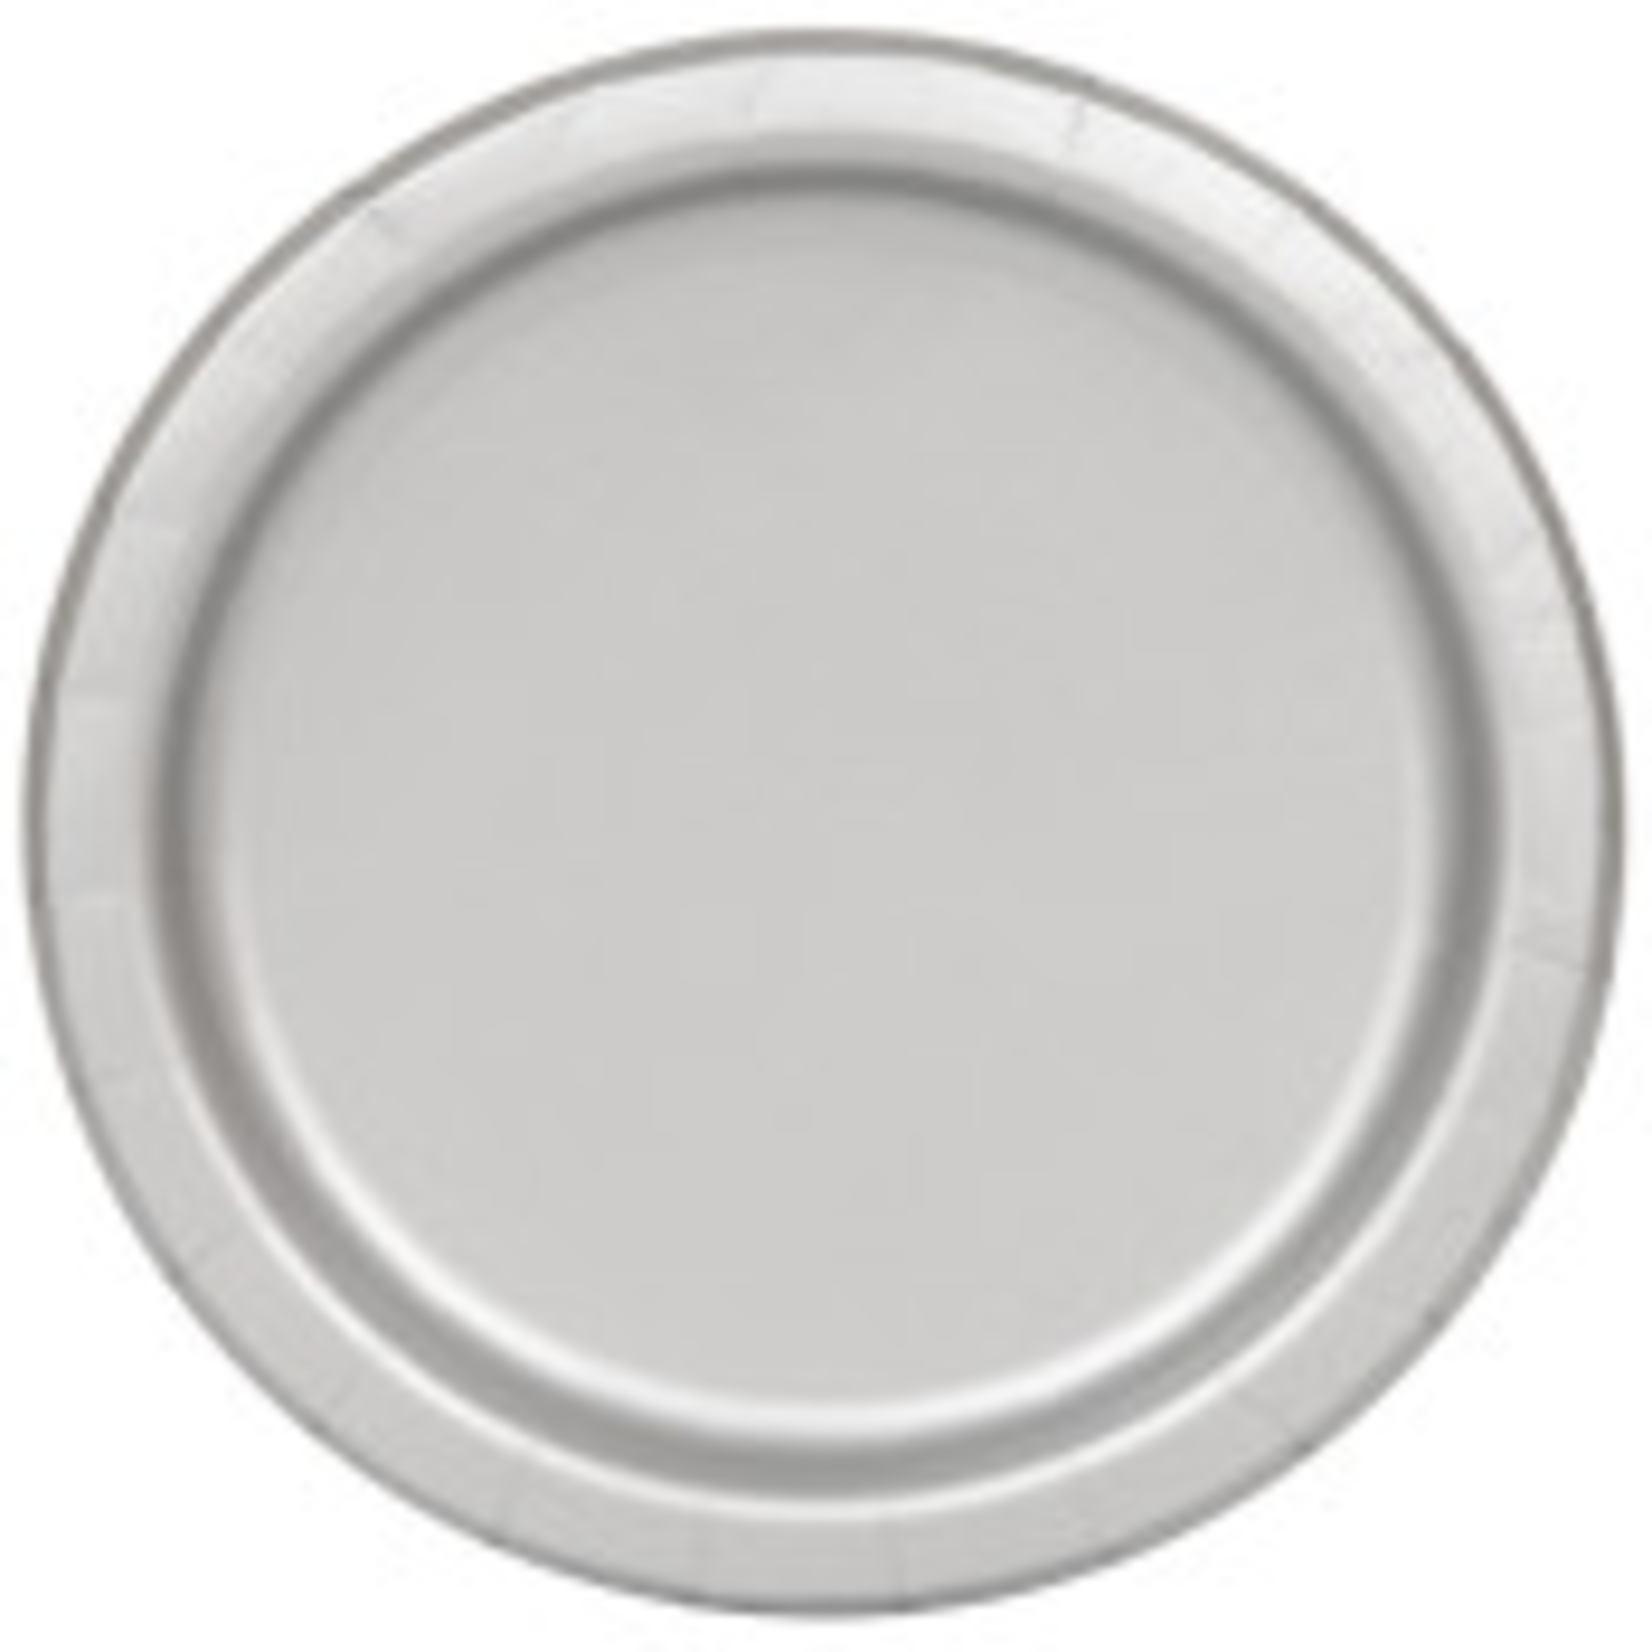 16PCS  9" Round Plates SILVER SOLID